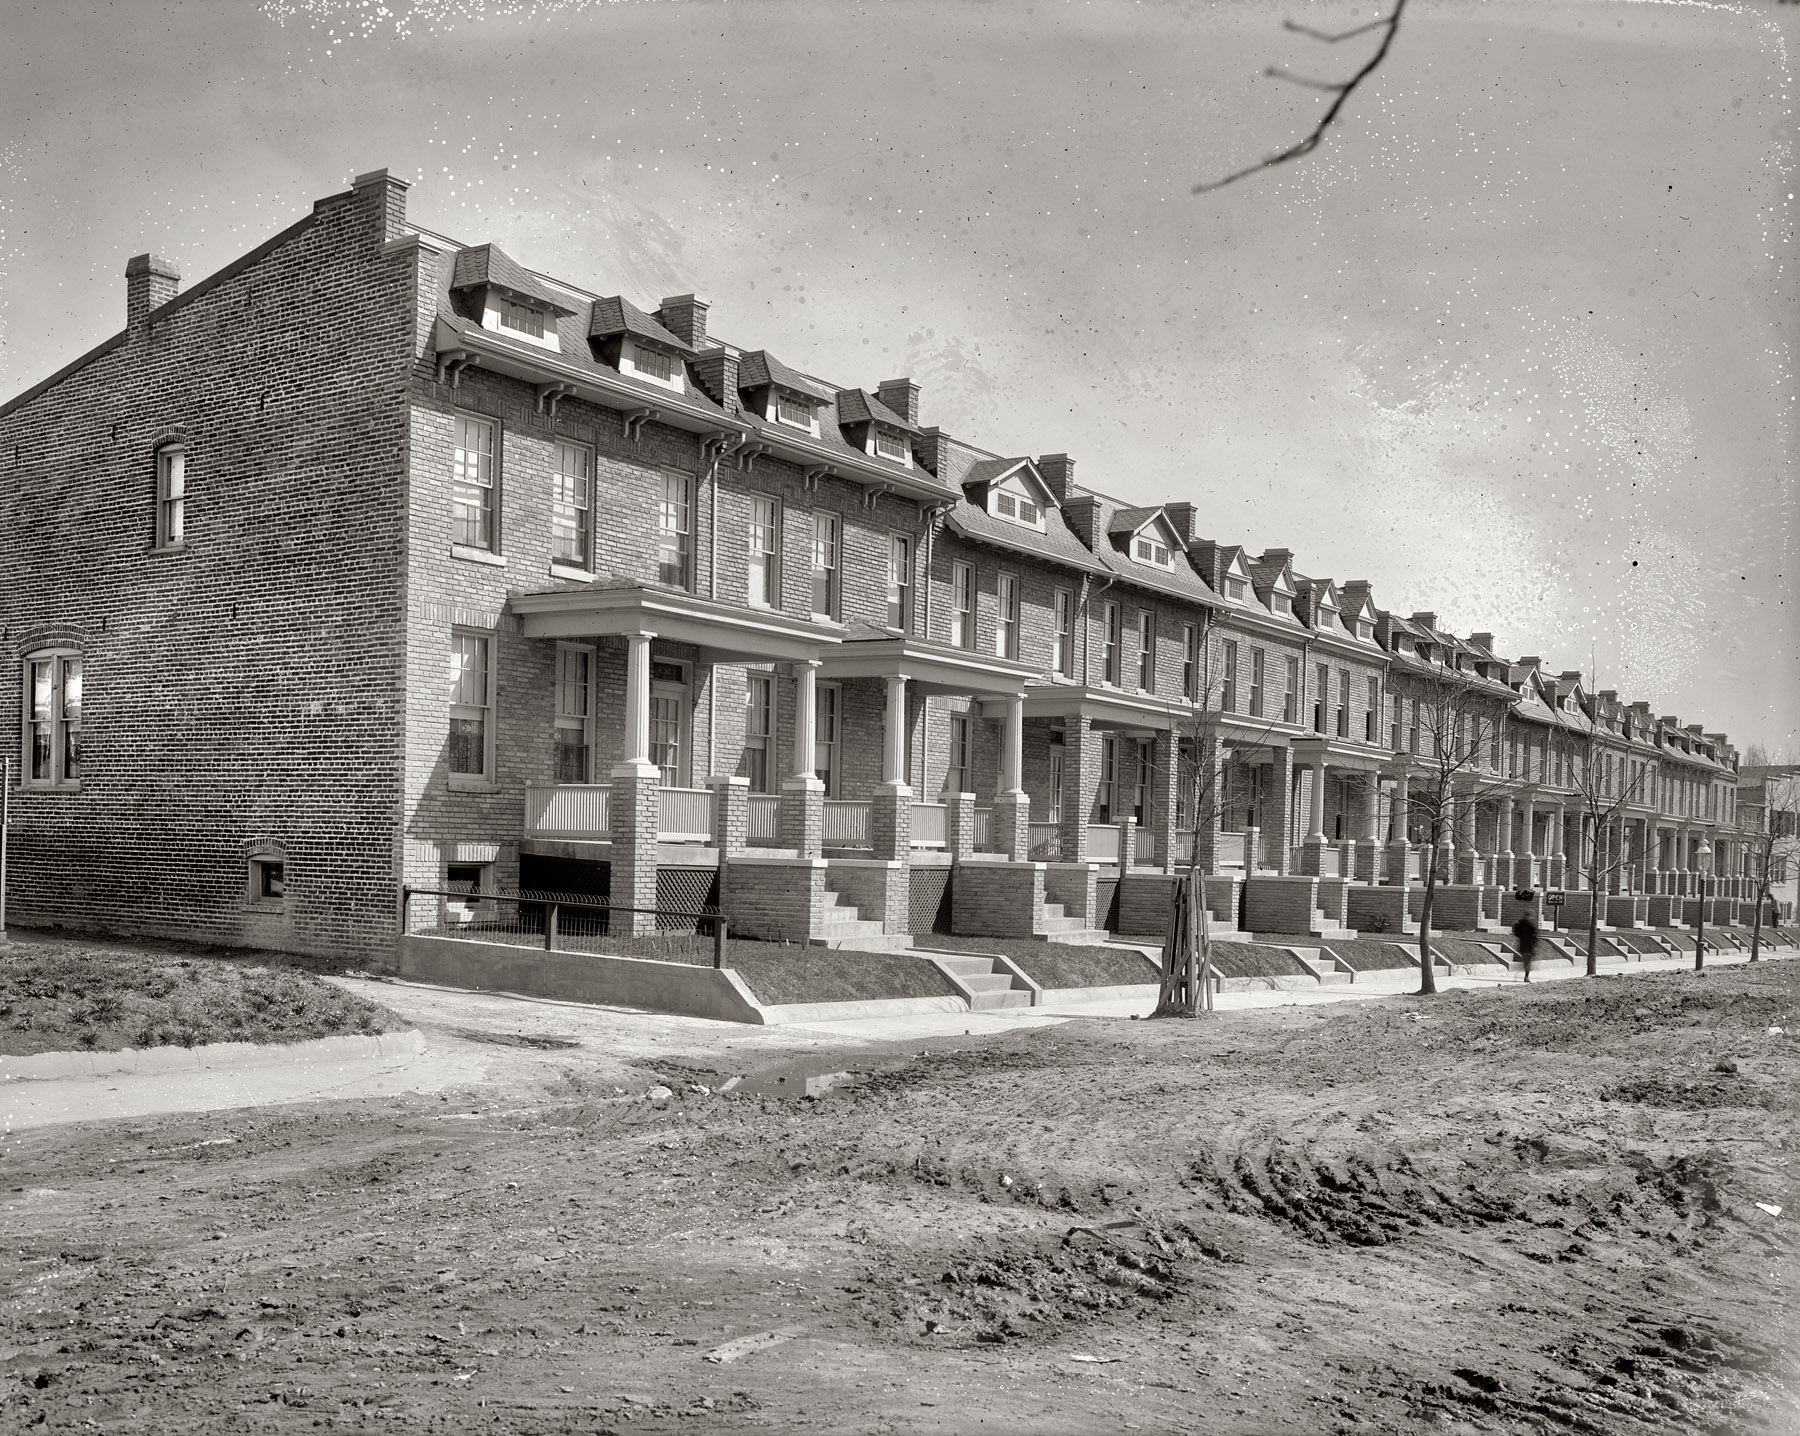 District of Columbia, 1919 or 1920. "Washington Times, 609 to 637 Princeton Street." View full size. National Photo Company Collection glass negative.